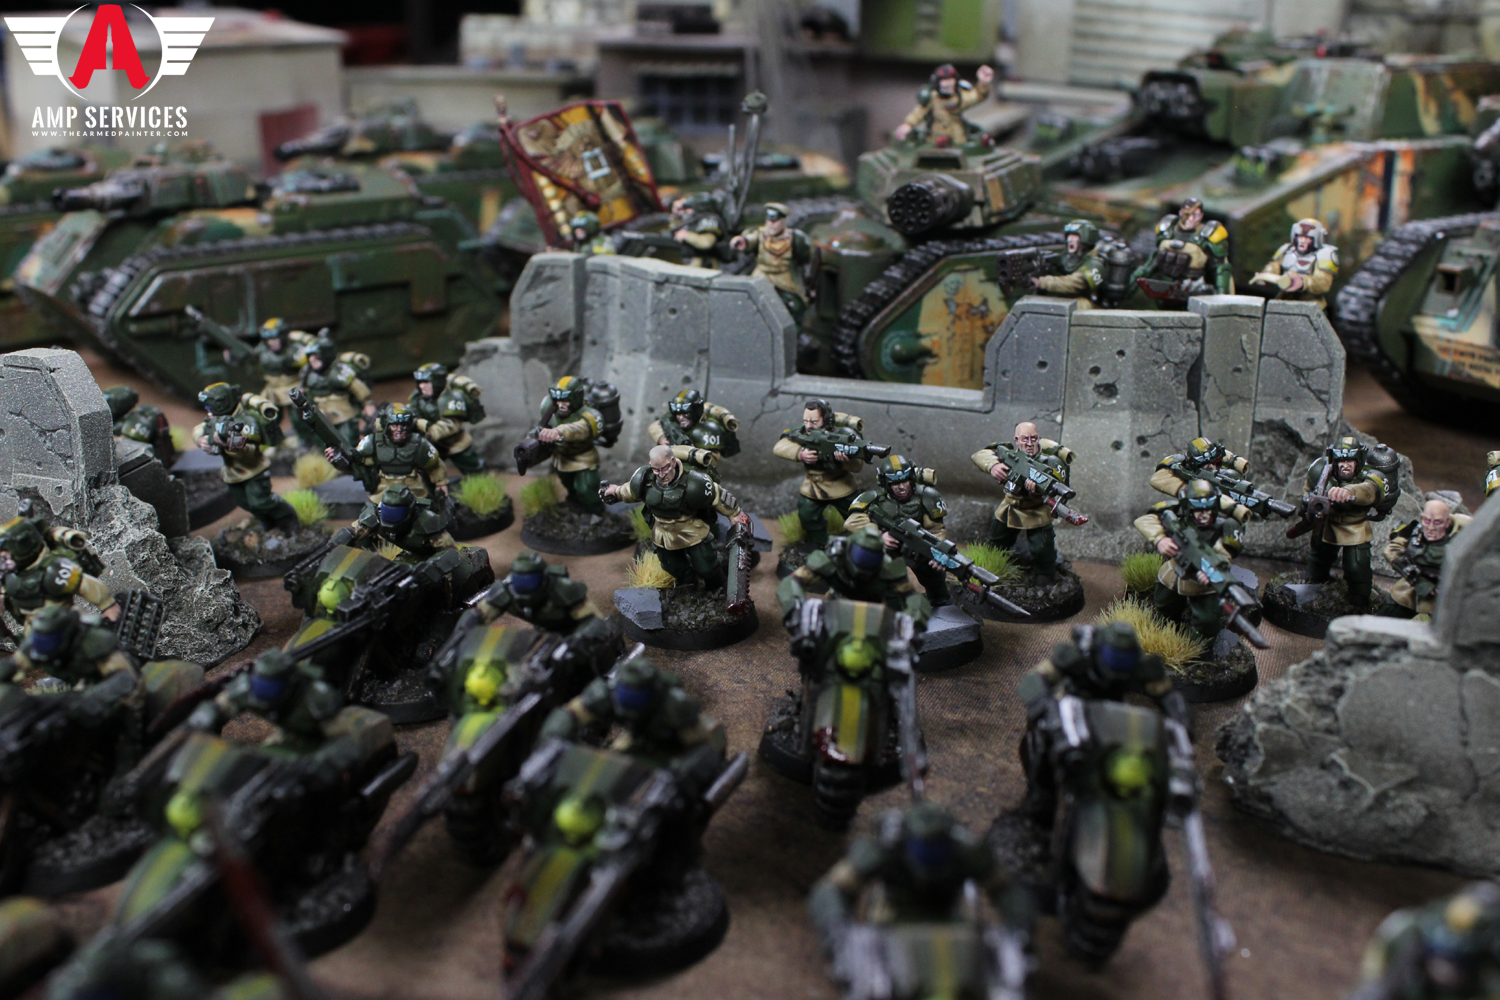 Ampservices, Armed Miniature Painting Services, Astra Militarum, B4h, Brush 4 Hire, Imperial Guard, Thearmedpainter